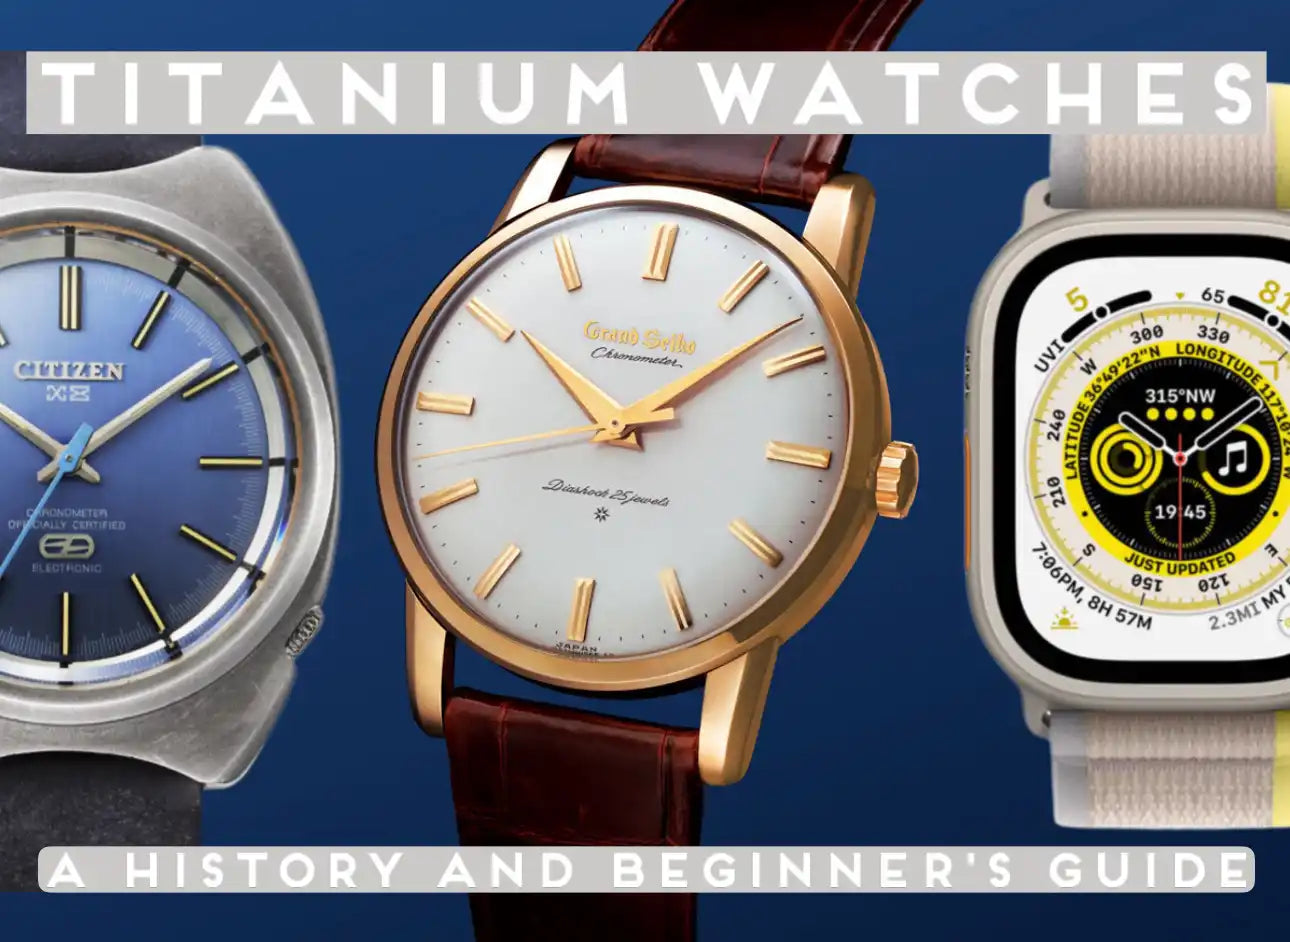 titanium watch history from Infinity Loops